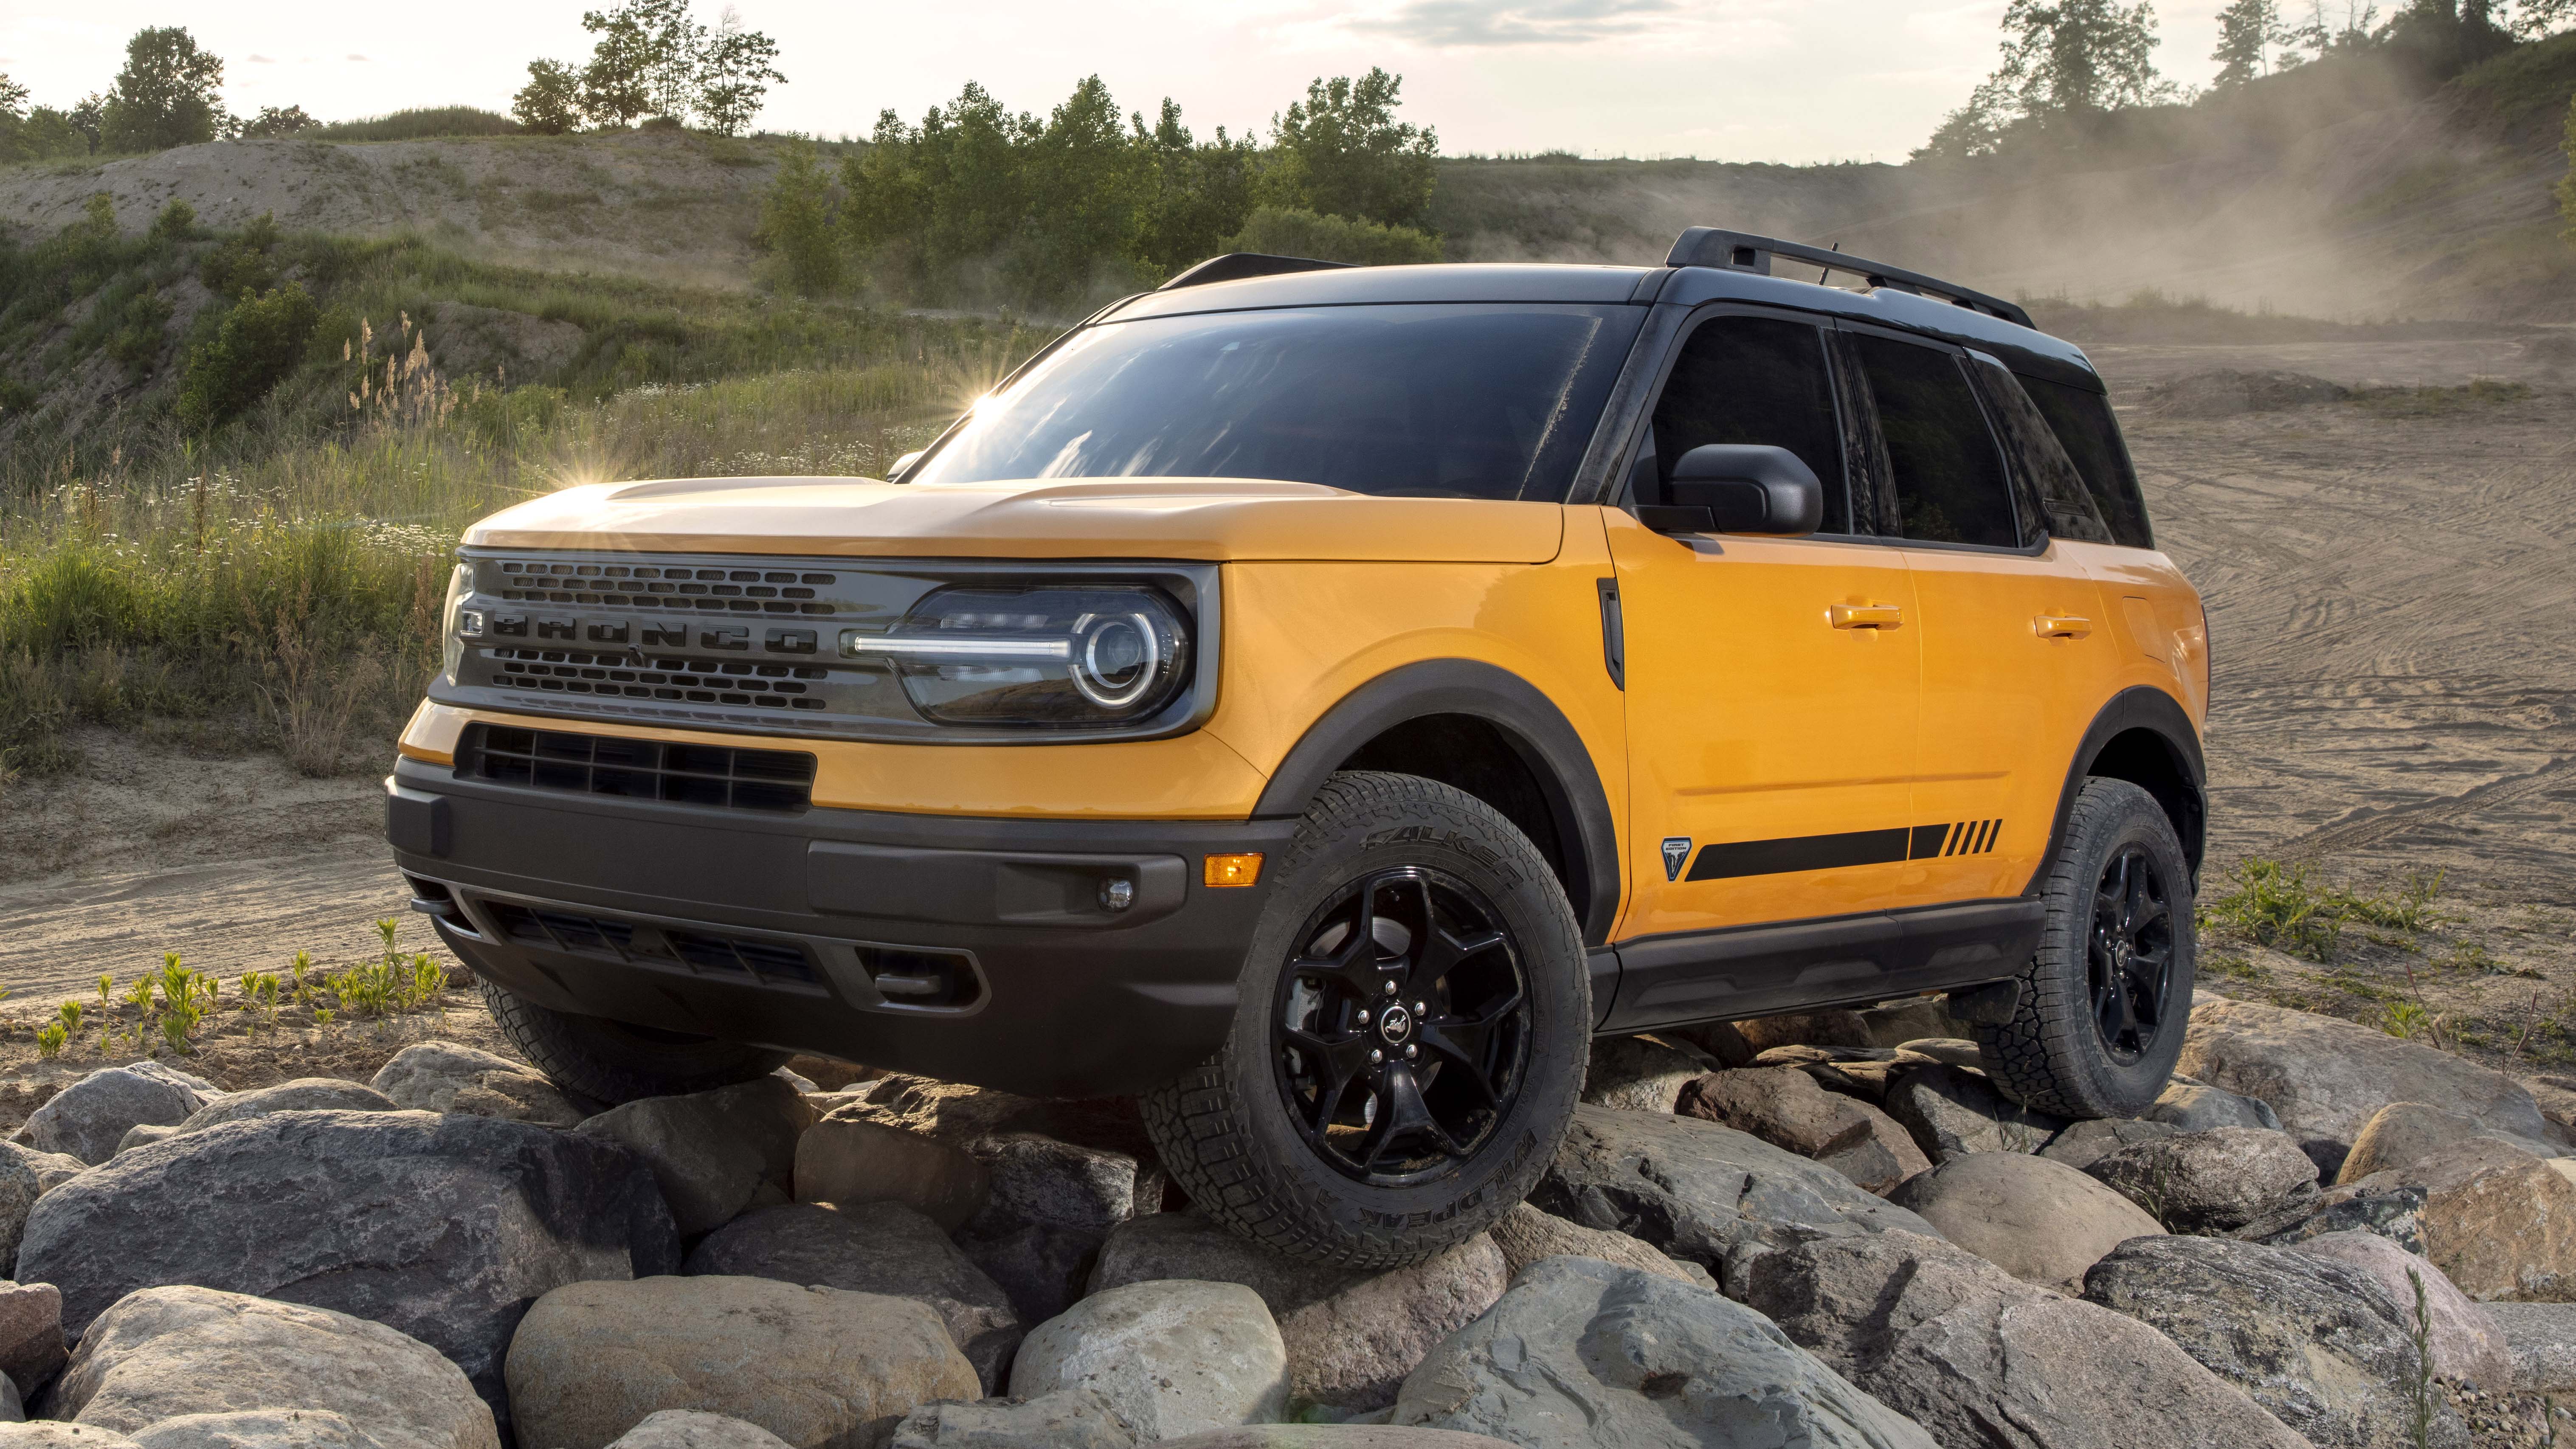 new-shots-of-the-2021-ford-bronco-show-suspension-removable-roof